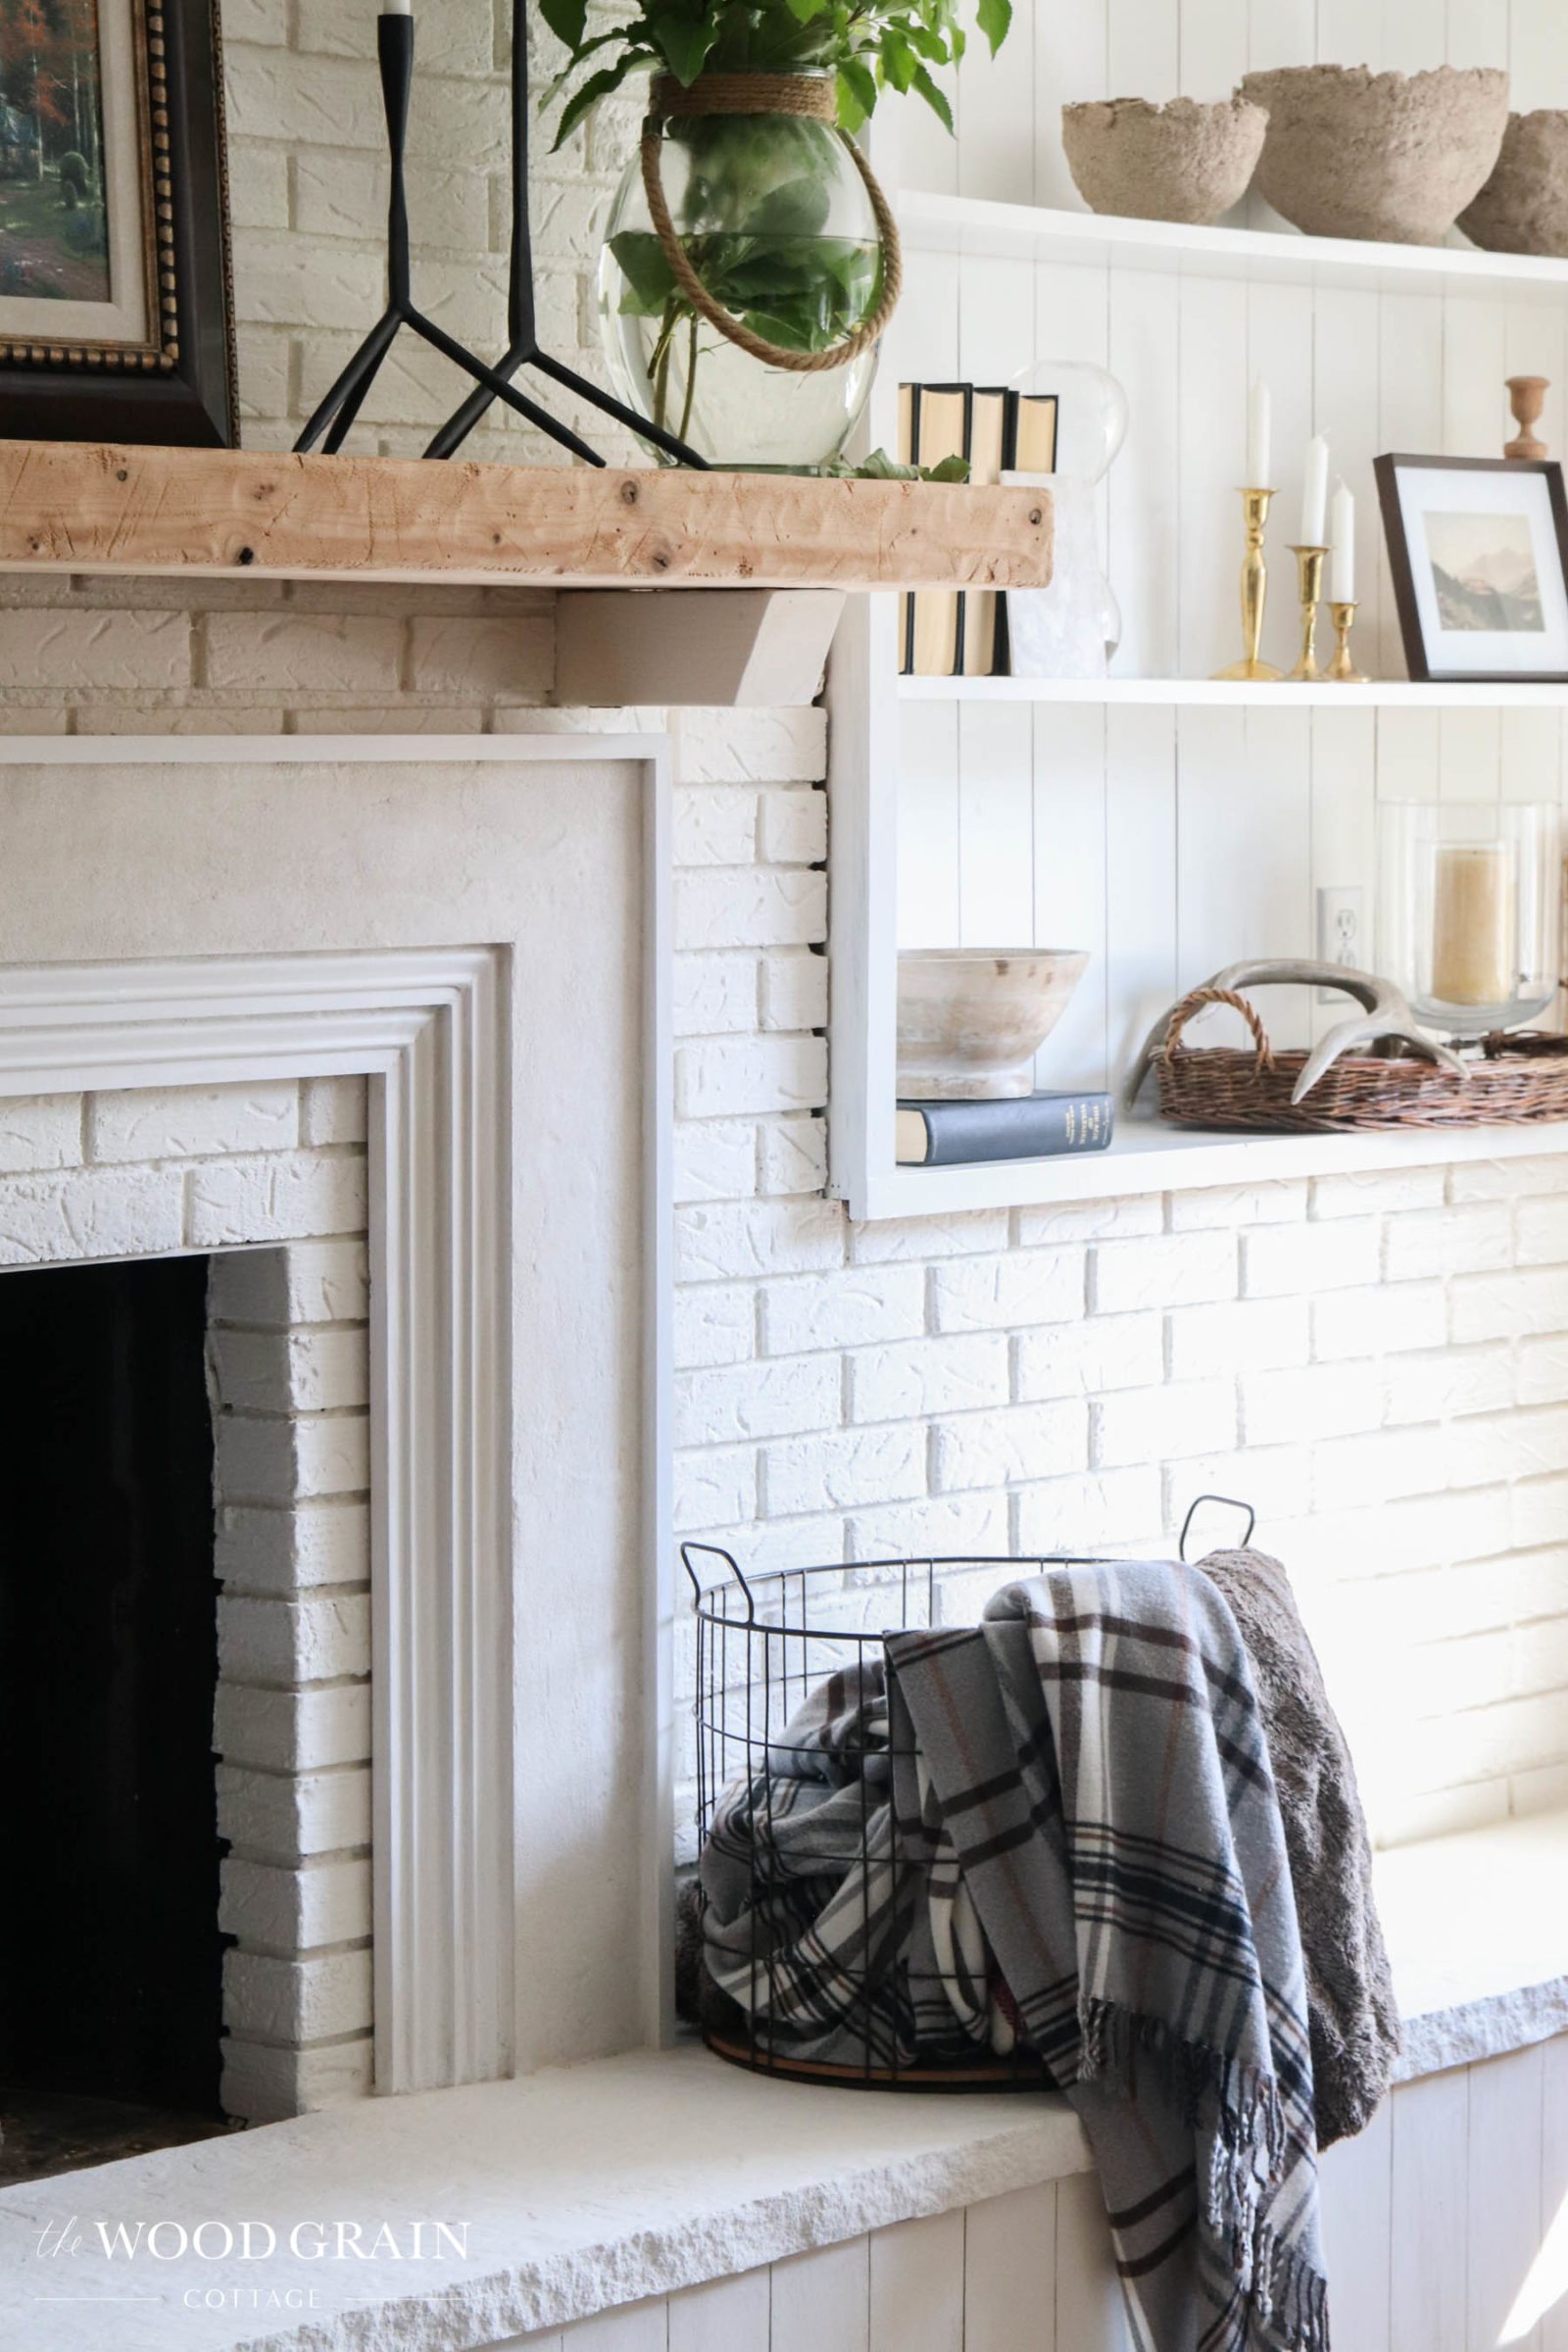 Our Brick Fireplace Makeover - The Wood Grain Cottage